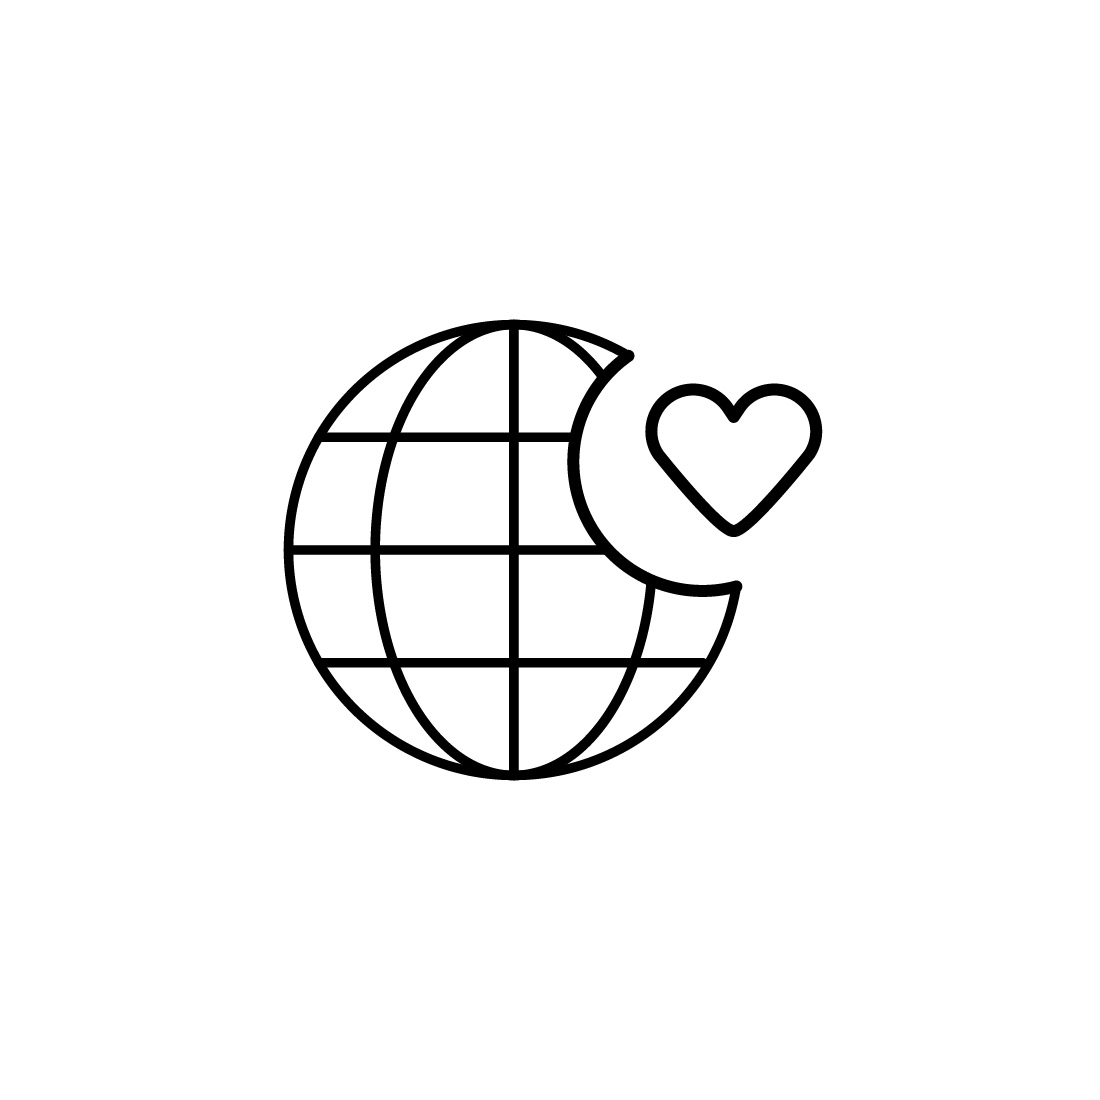 Black and white picture of a globe with a heart.